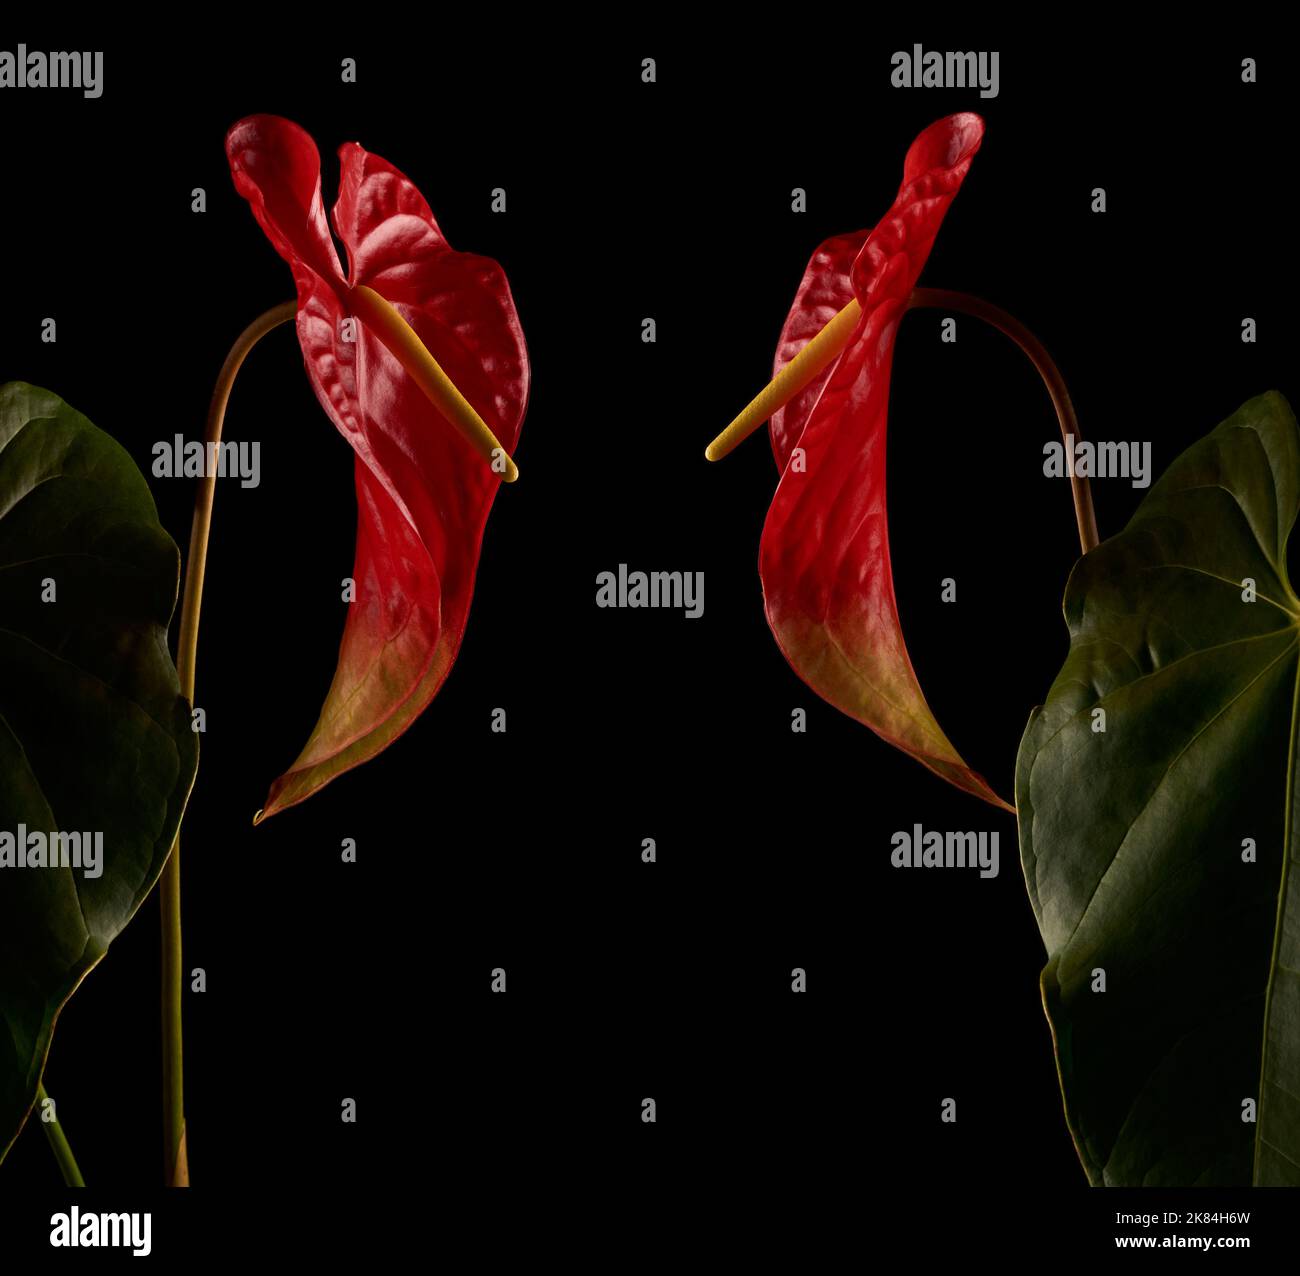 bi-colored anthurium flowers, also known as tail flower, flamingo and laceleaf, waxy red and light green color flowers isolated on black background Stock Photo